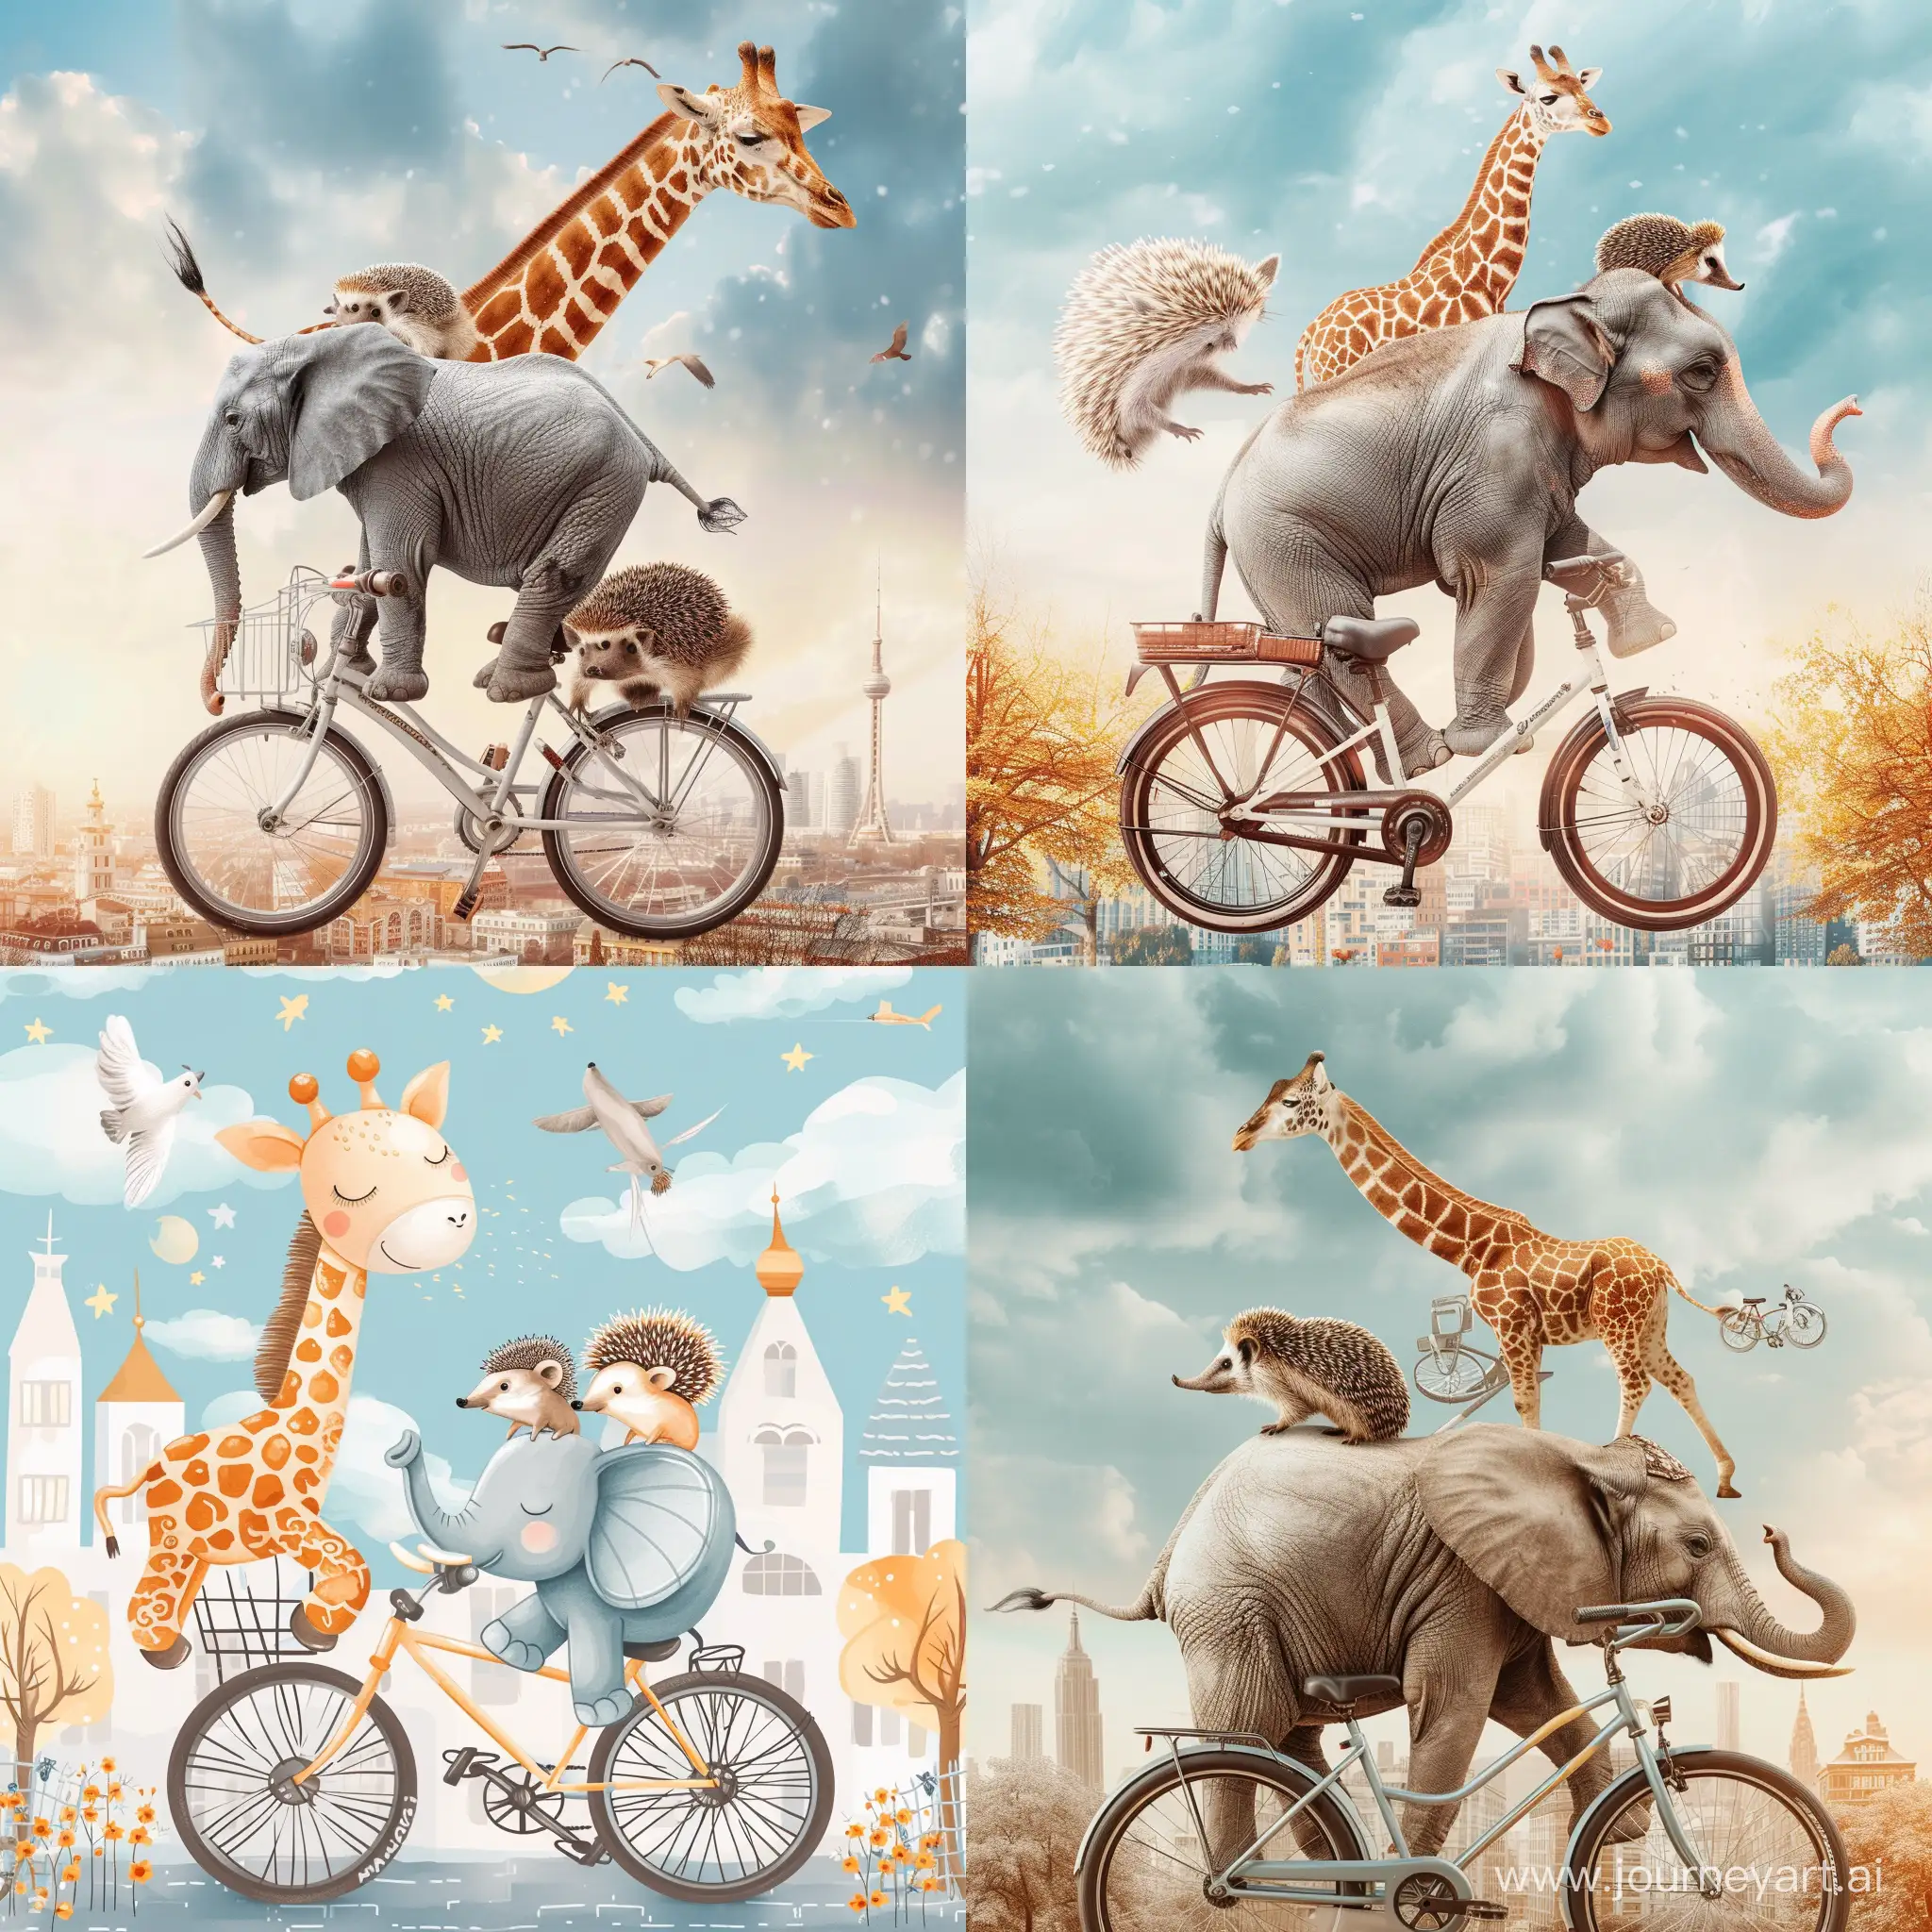 Whimsical-Animals-Ride-Bicycles-in-City-Skyline-Playful-Childrens-Wallpaper-Design